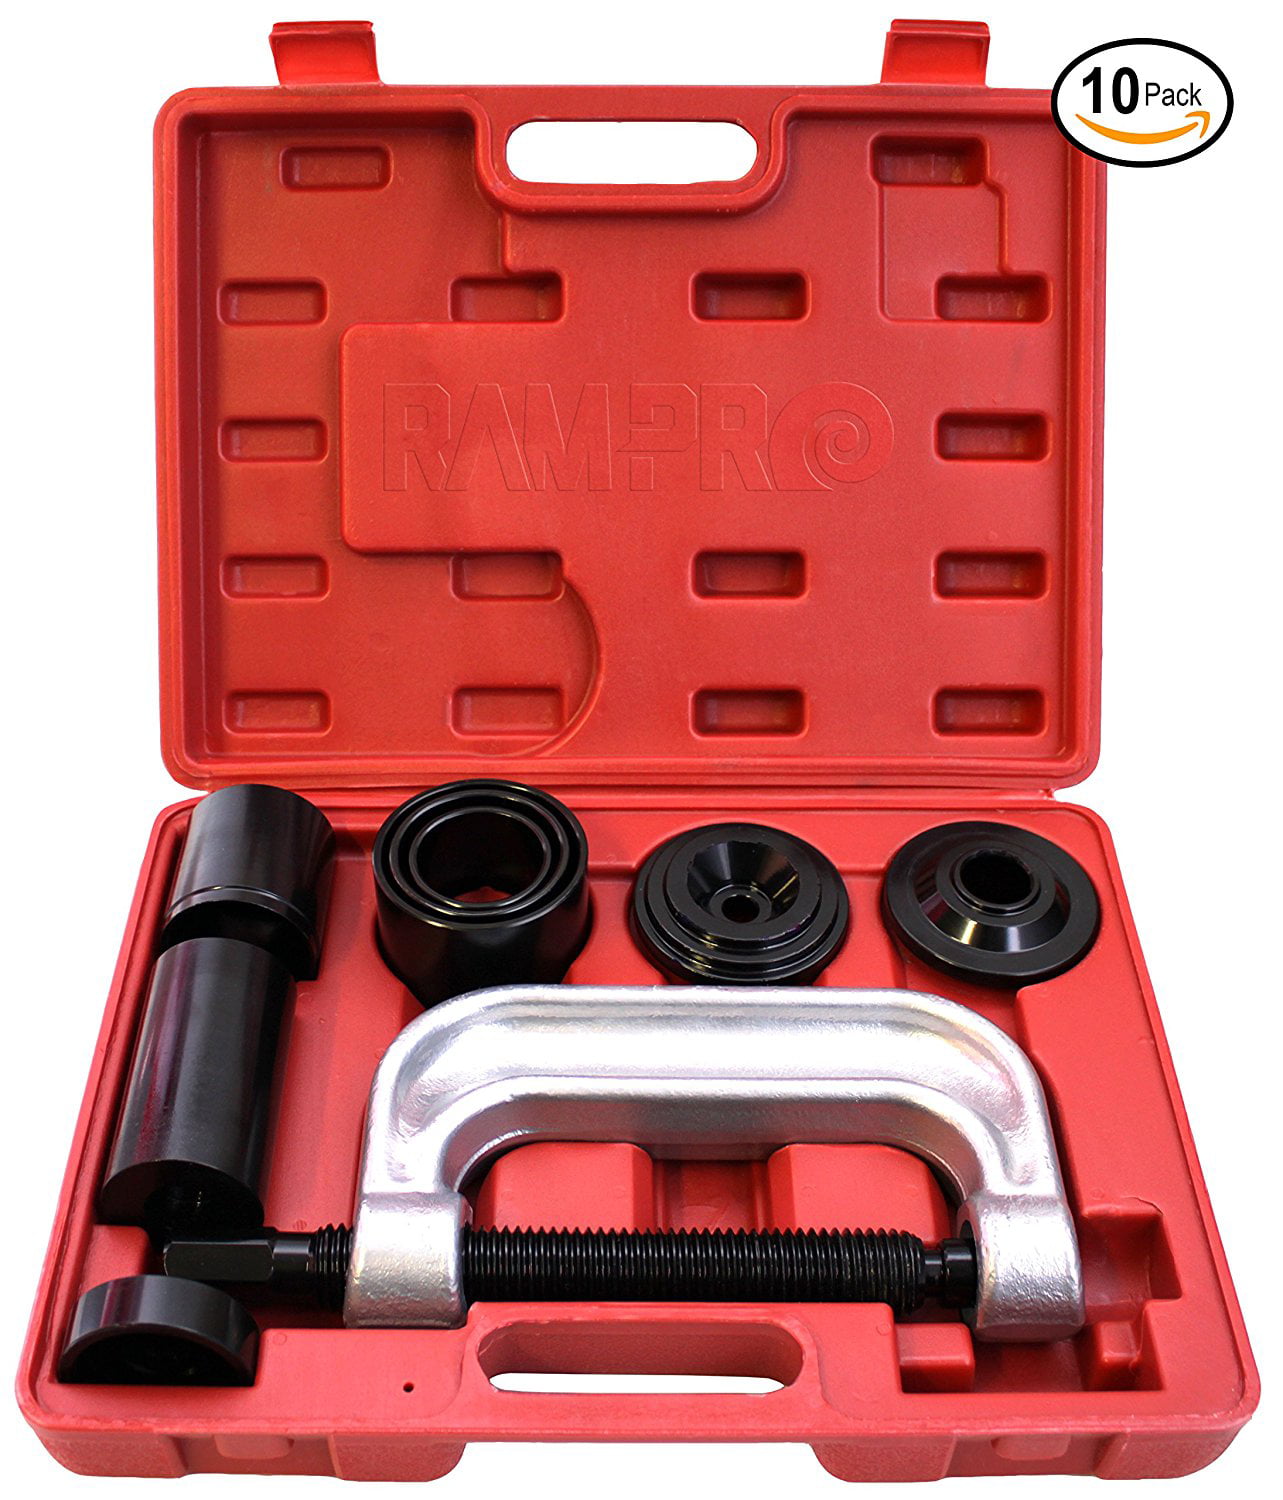 DASBET 21PCS Ball Joint Repair Puller Service Auto Remover Installer Automotive Mechanic Adapter Tool Kit for 2WD 4WD Vehicles 